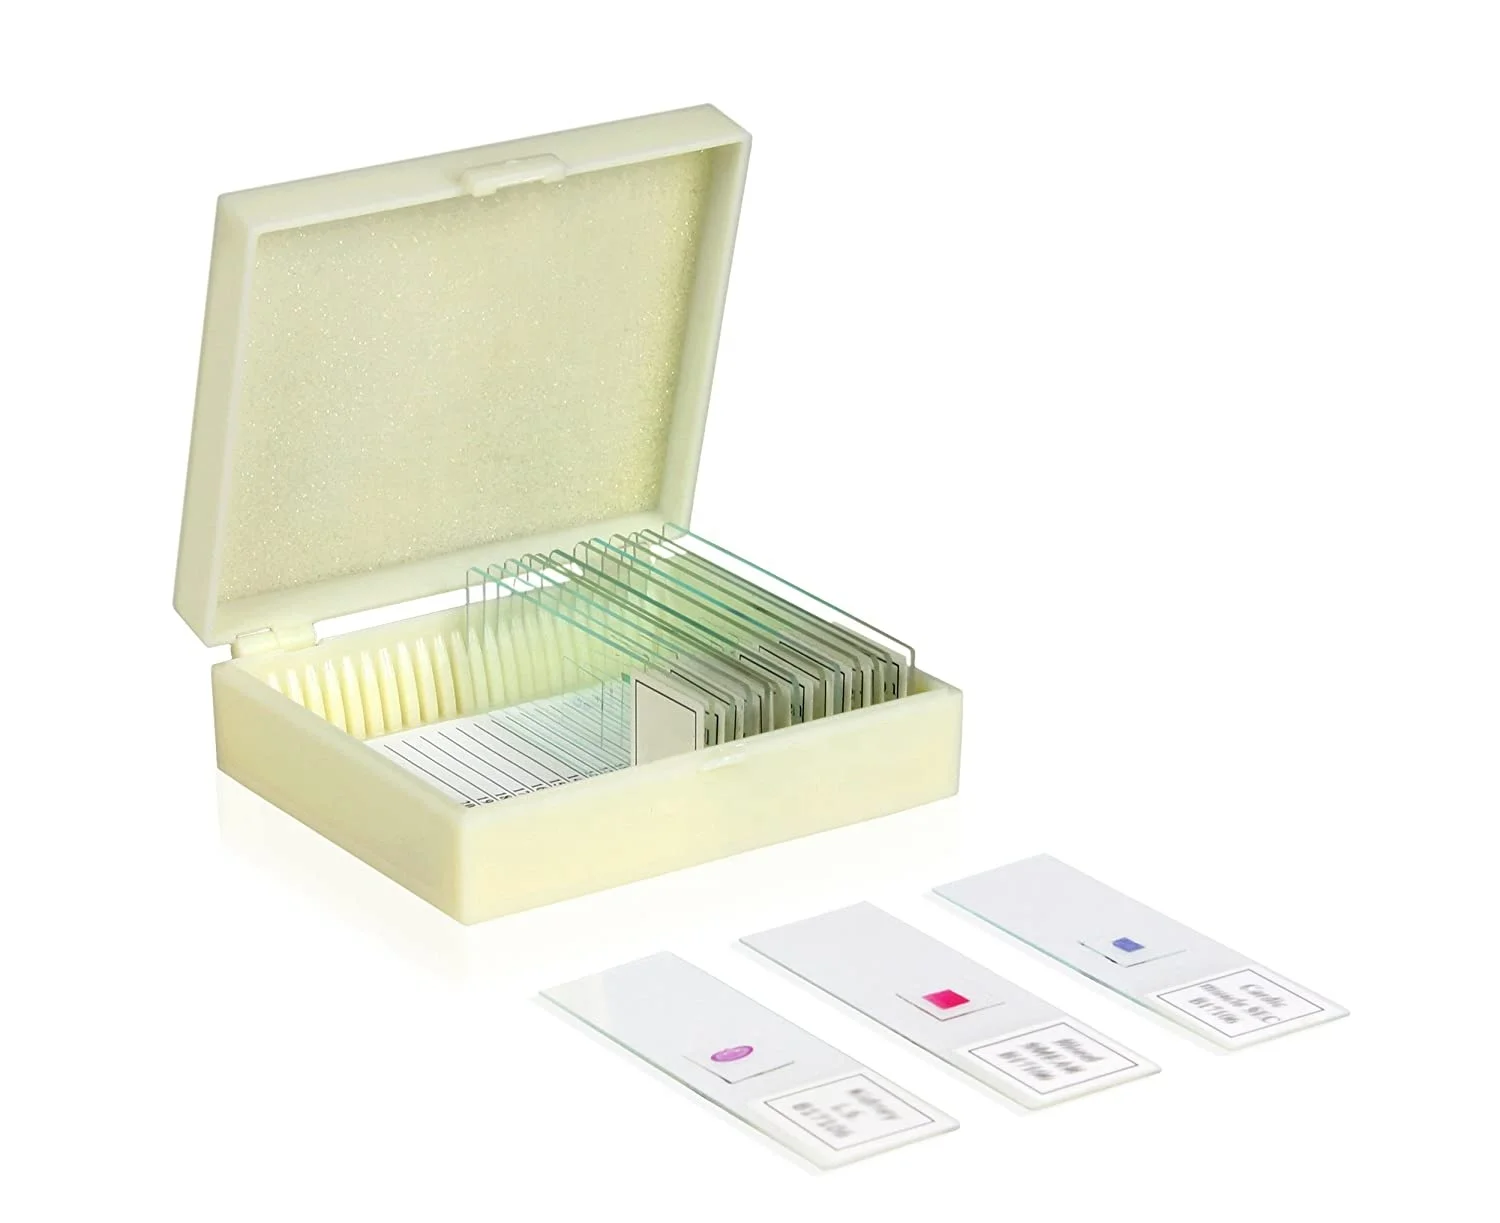 Laboratory Research Insect medical glass prepared microscope slides with Specimen